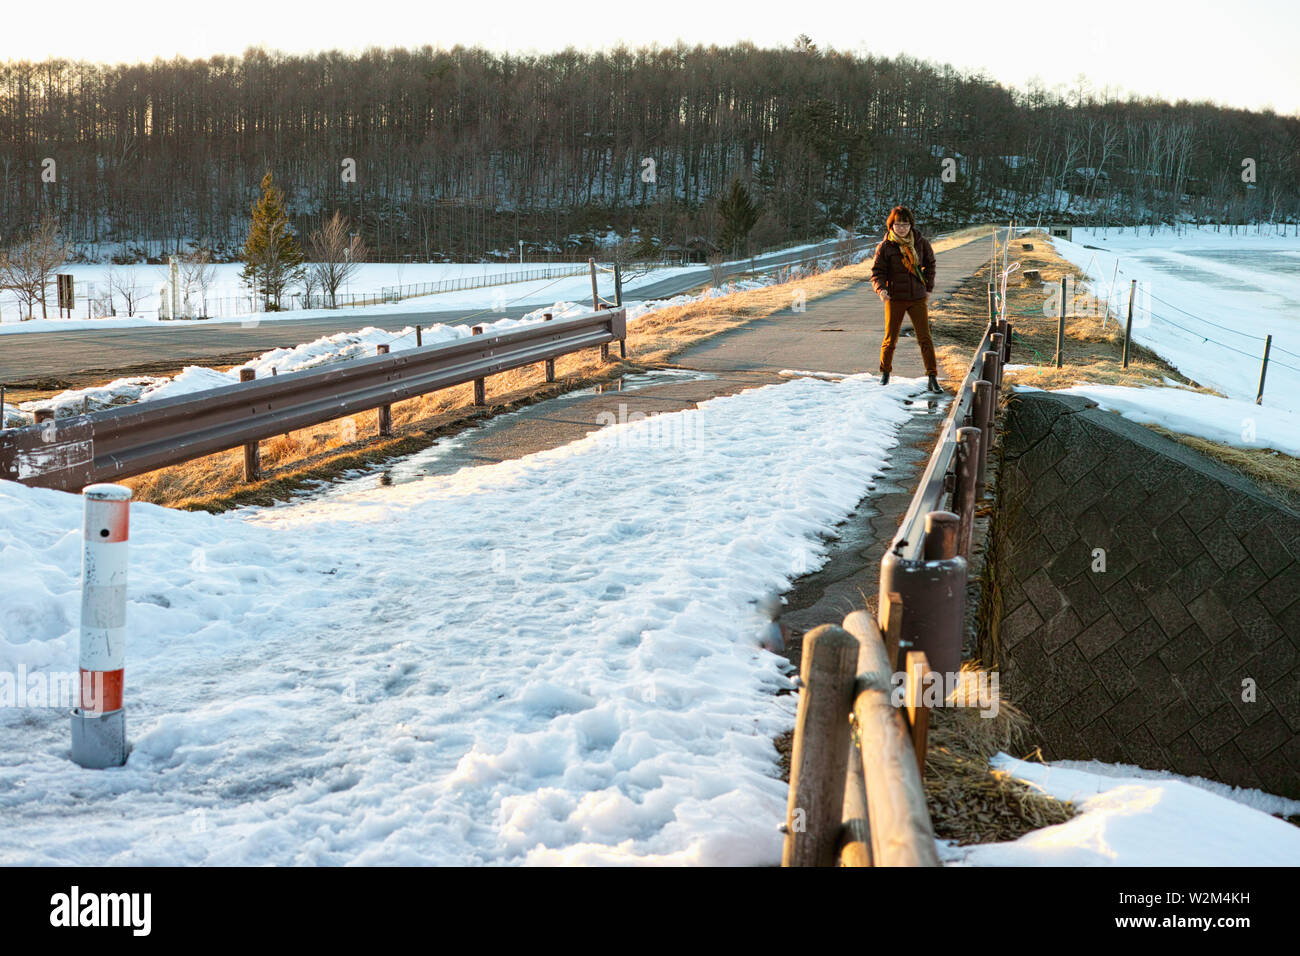 An older lady taking care to walk across a snowy and icy bridge. Stock Photo